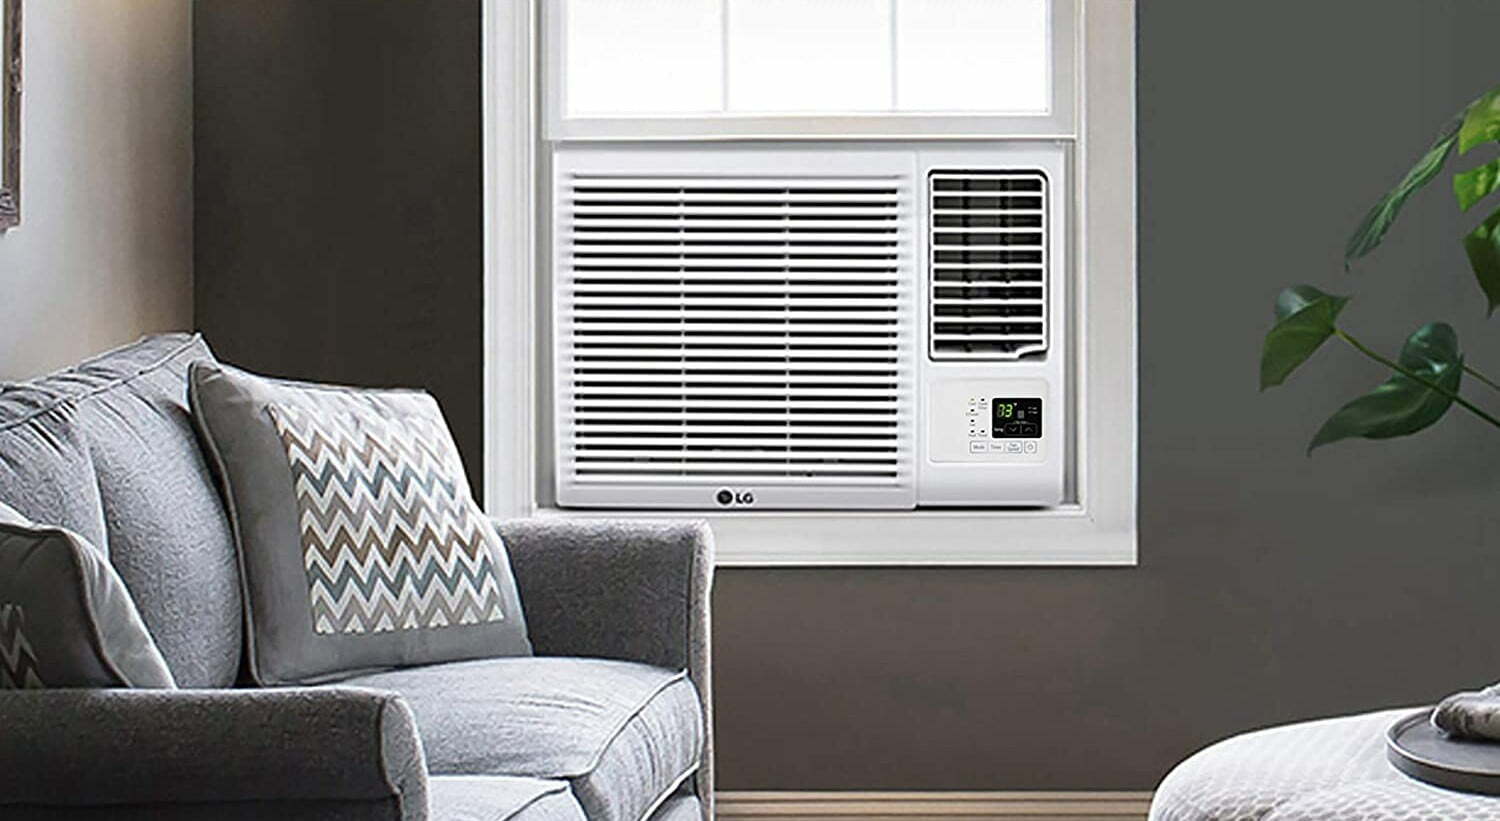 How Heavy Is a Window Air Conditioner?